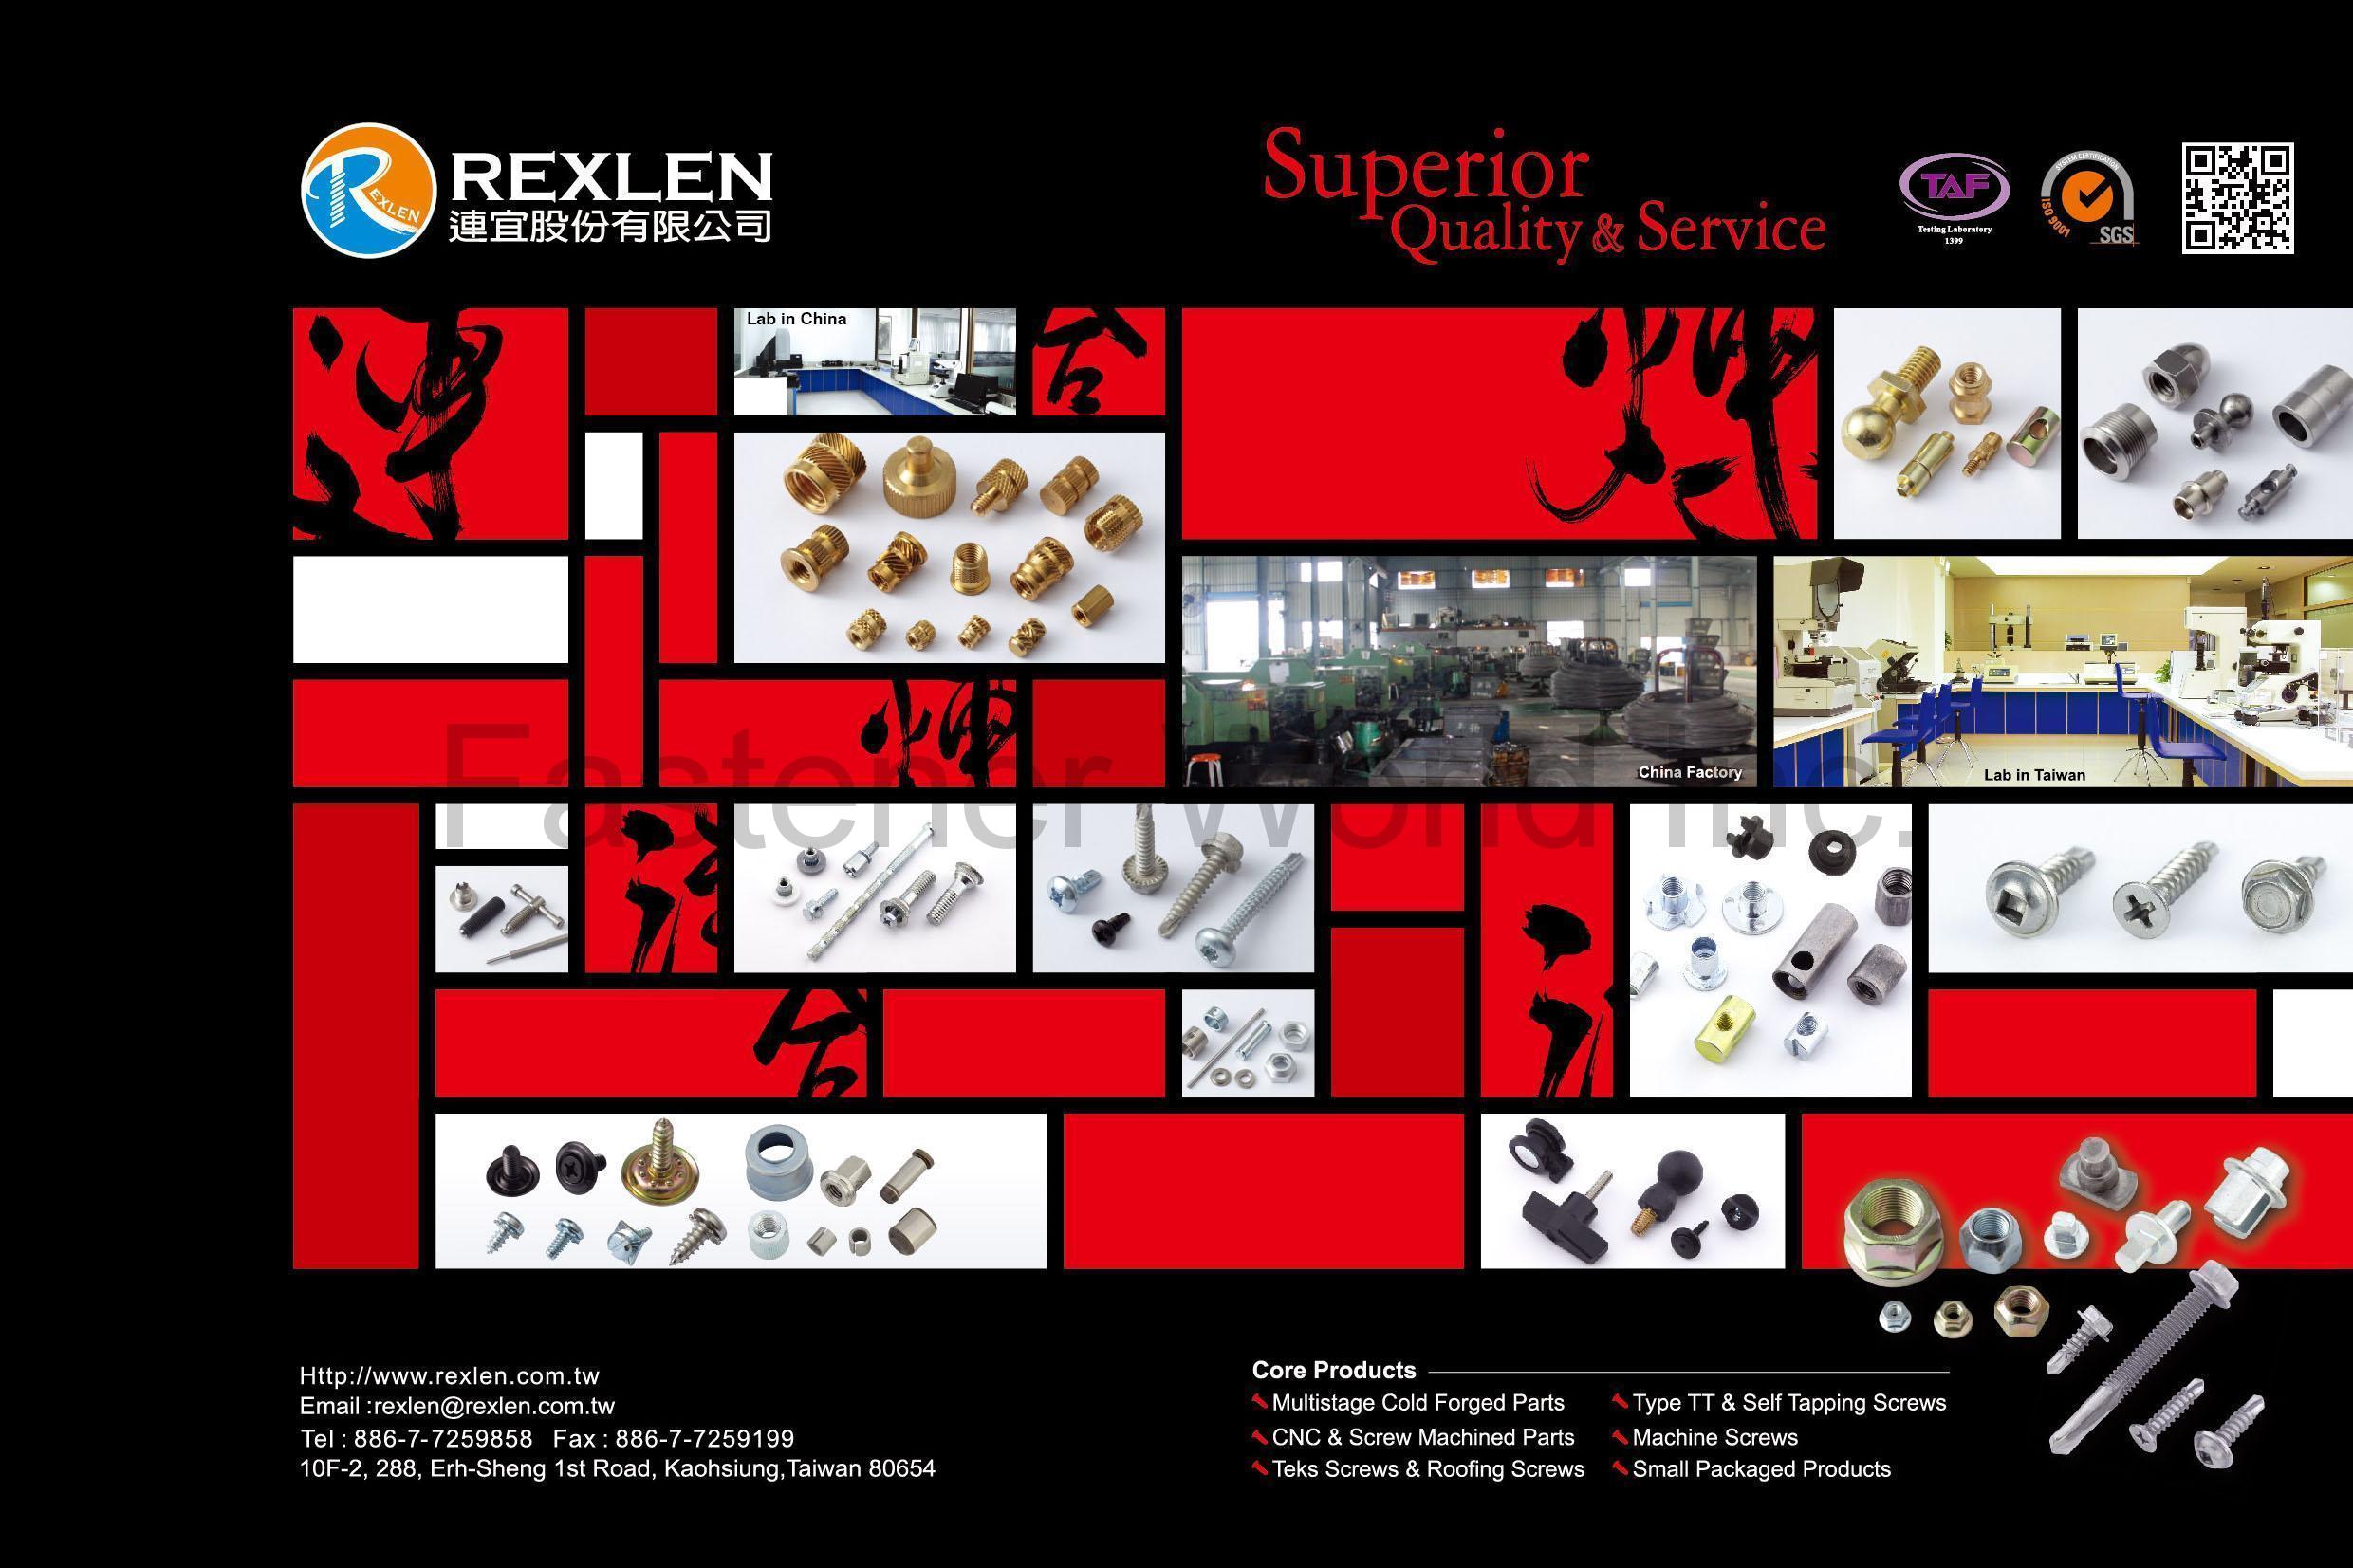 REXLEN CORP.  , Multistage Cold Forged Parts, CNC & Screw Machined Parts, Teks Screws & Roofing Screws, Type TT & Self Tapping Screws, Machine Screws, Small Packaged Products , Special Cold / Hot Forming Parts